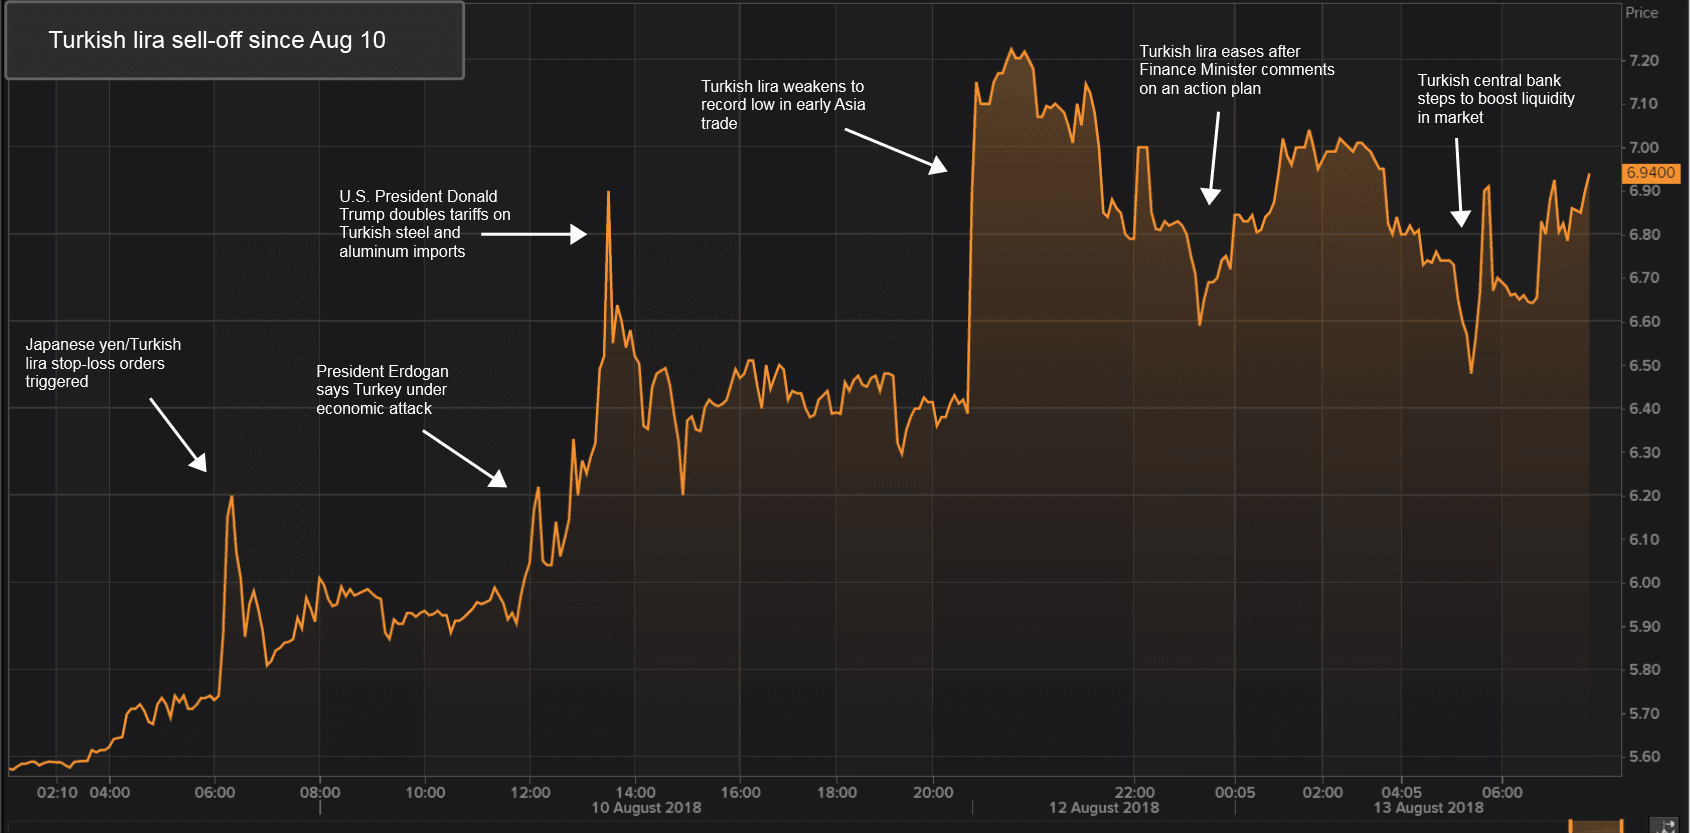 A chat showing the lira selloff since August 10, 2018.